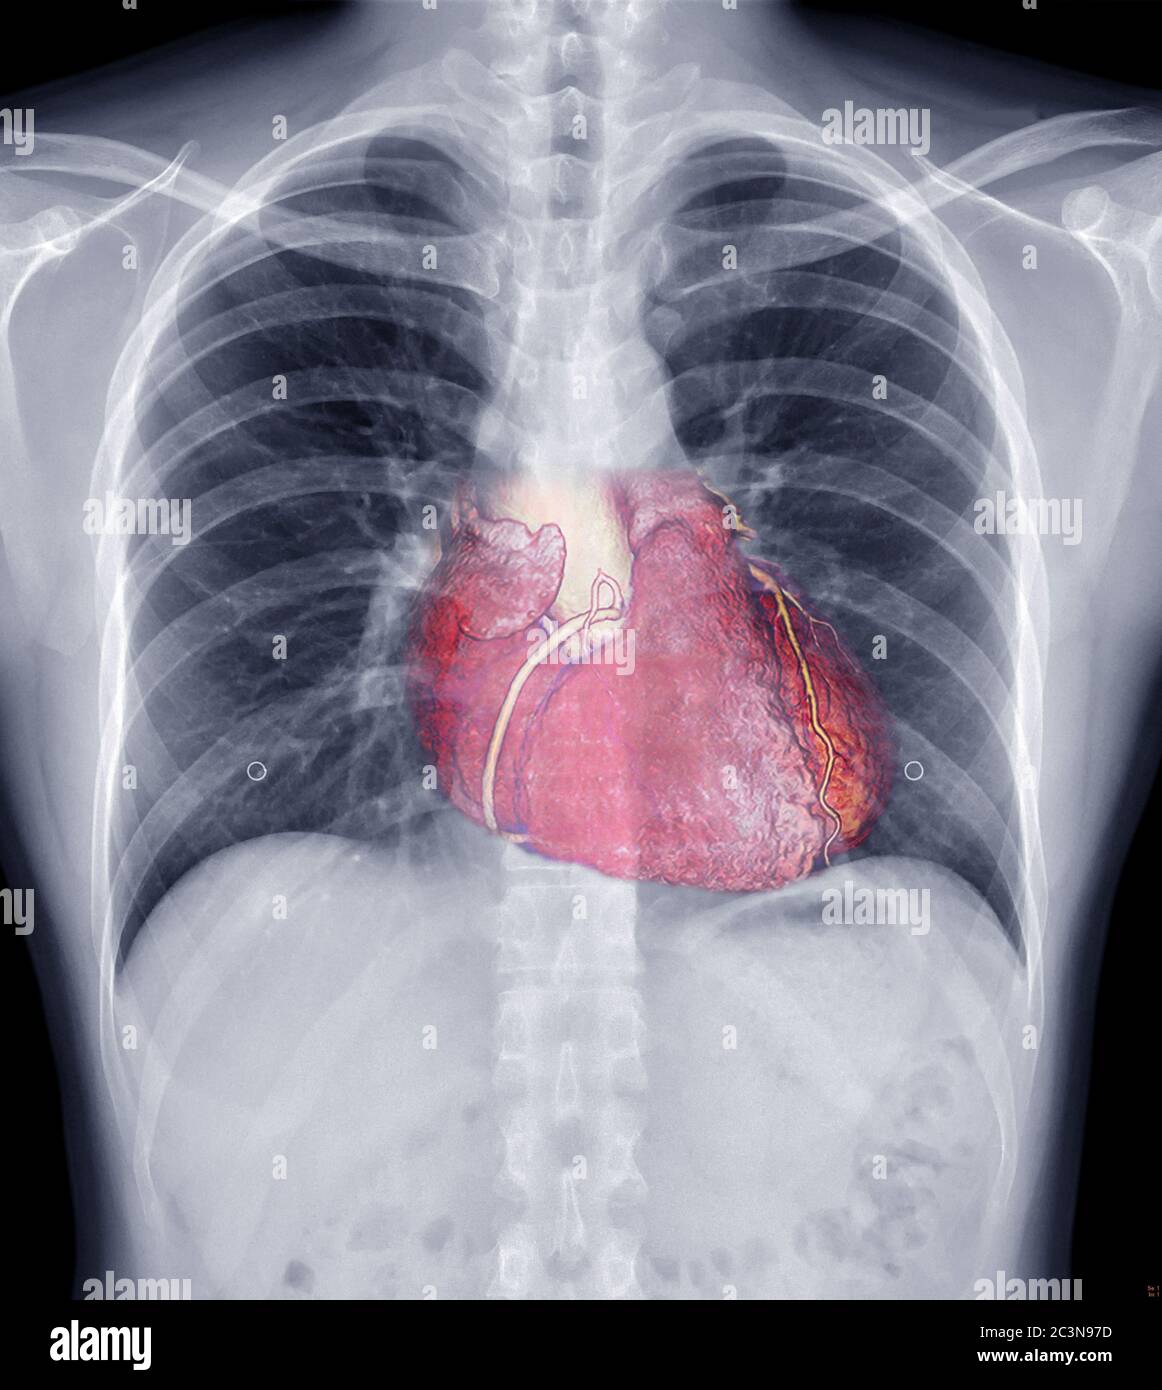 Mix Chest X-ray and 3D CTA Coronary arery Image showing heart inside the chest . check up concept. Stock Photo